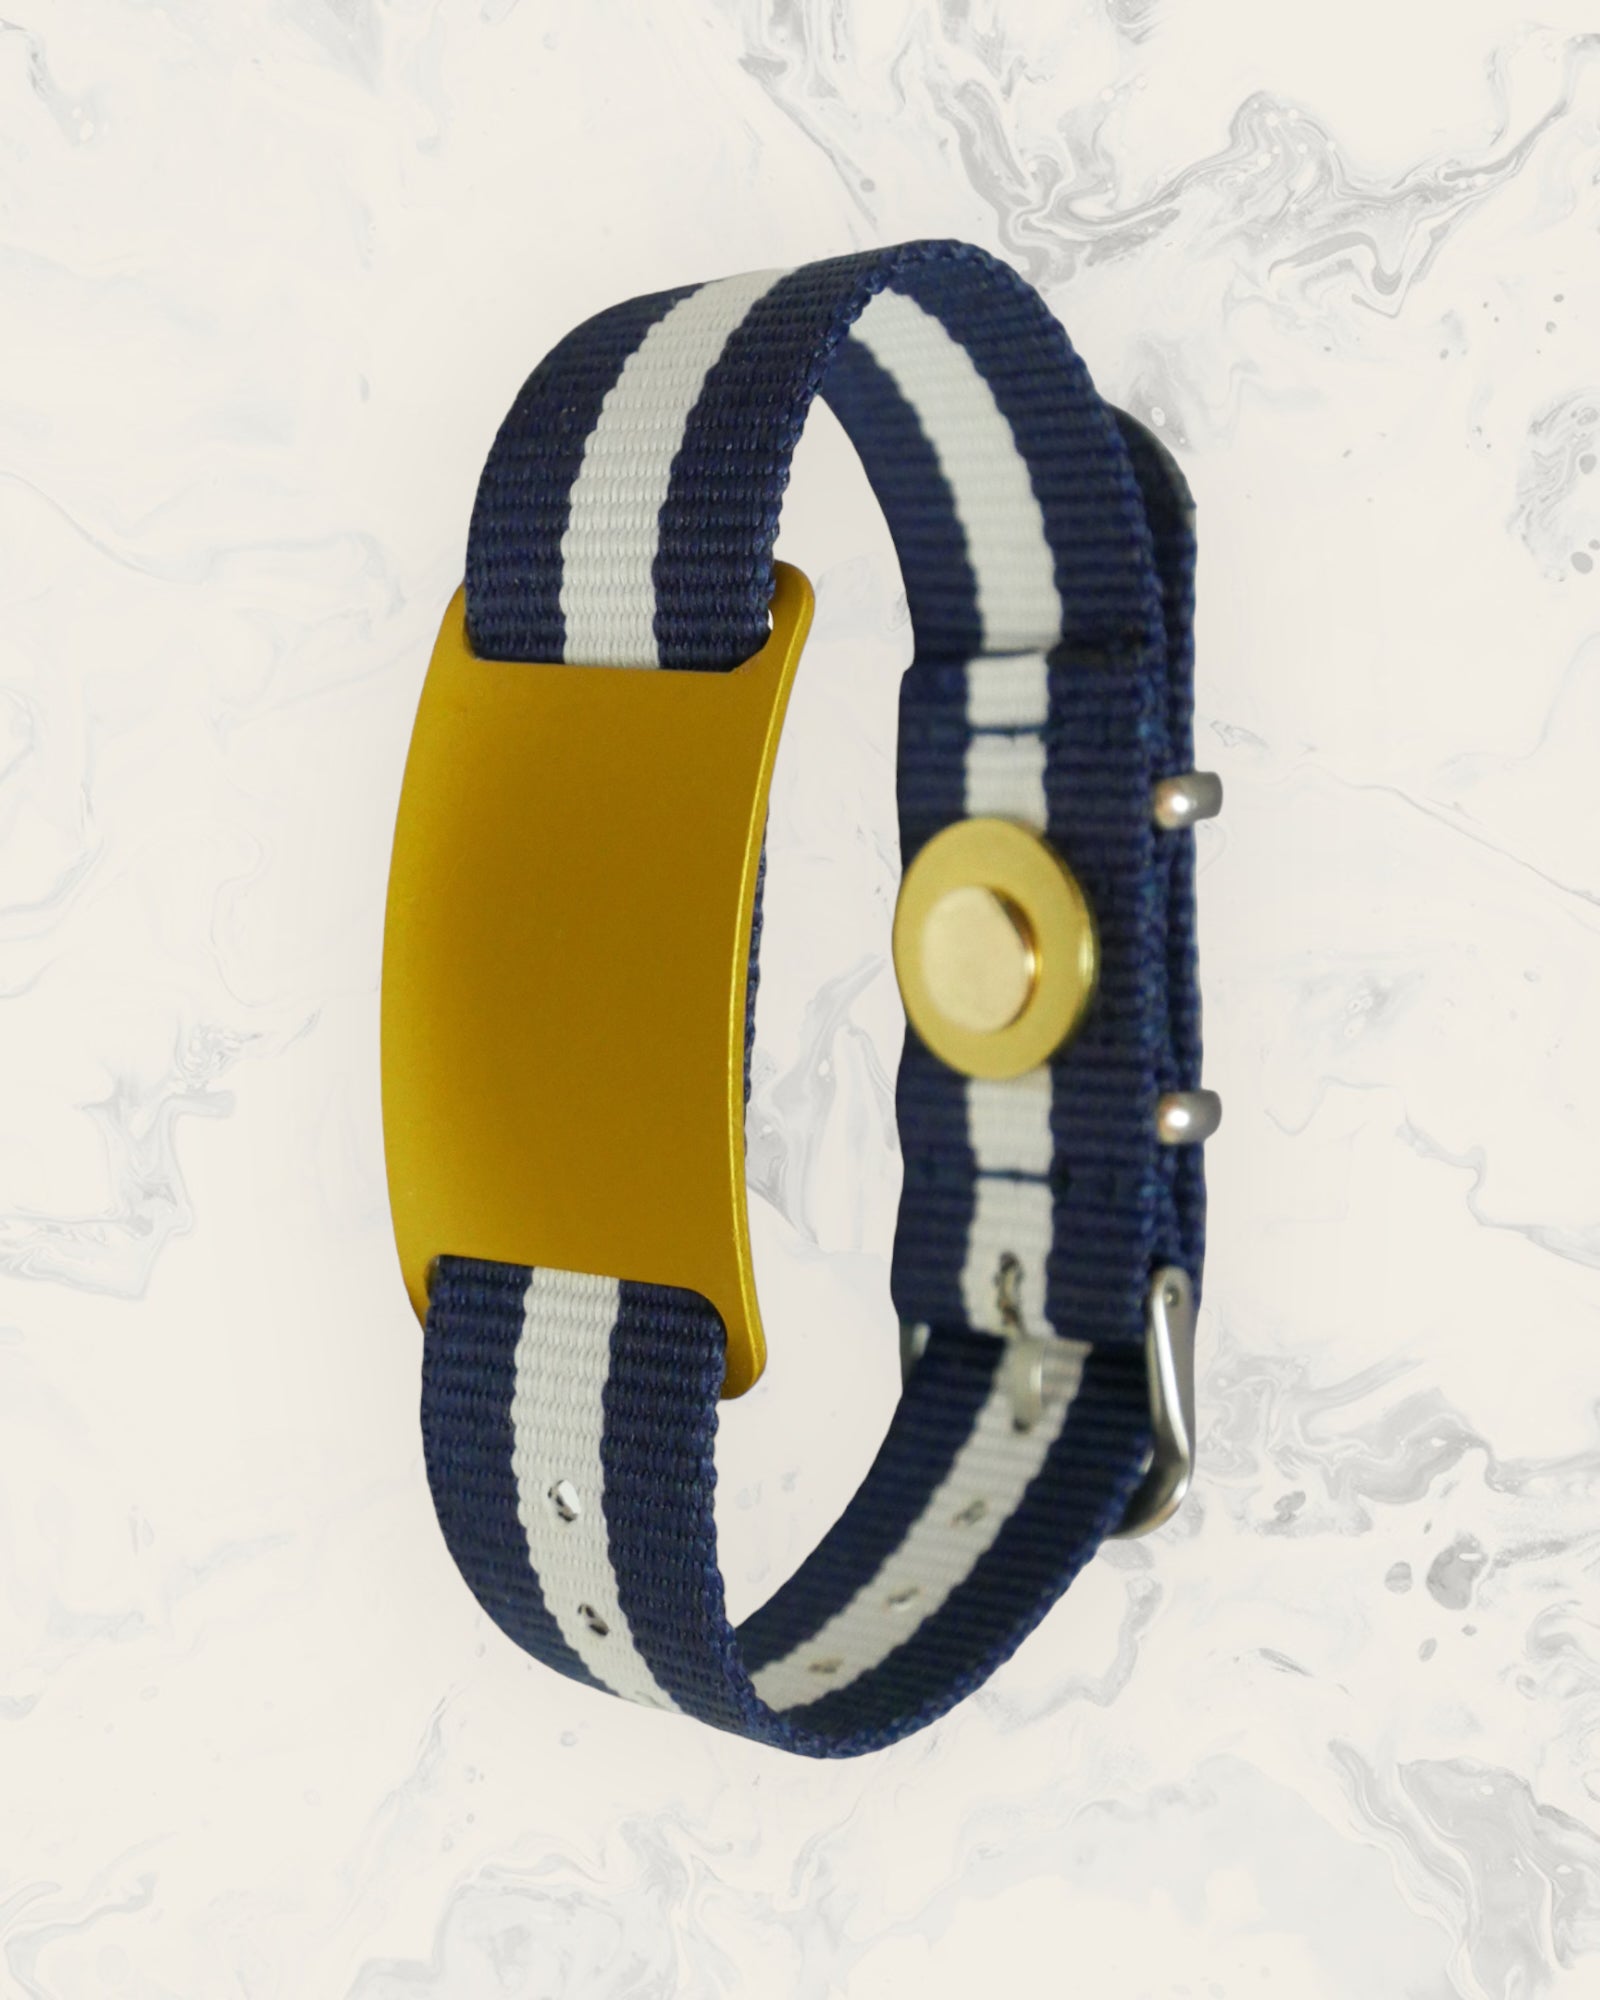 Frequency Jewelry Natural Pain Relief and EMF Protection Bracelet Nylon Band Color Navy Blue and White Striped with a Gold Slider